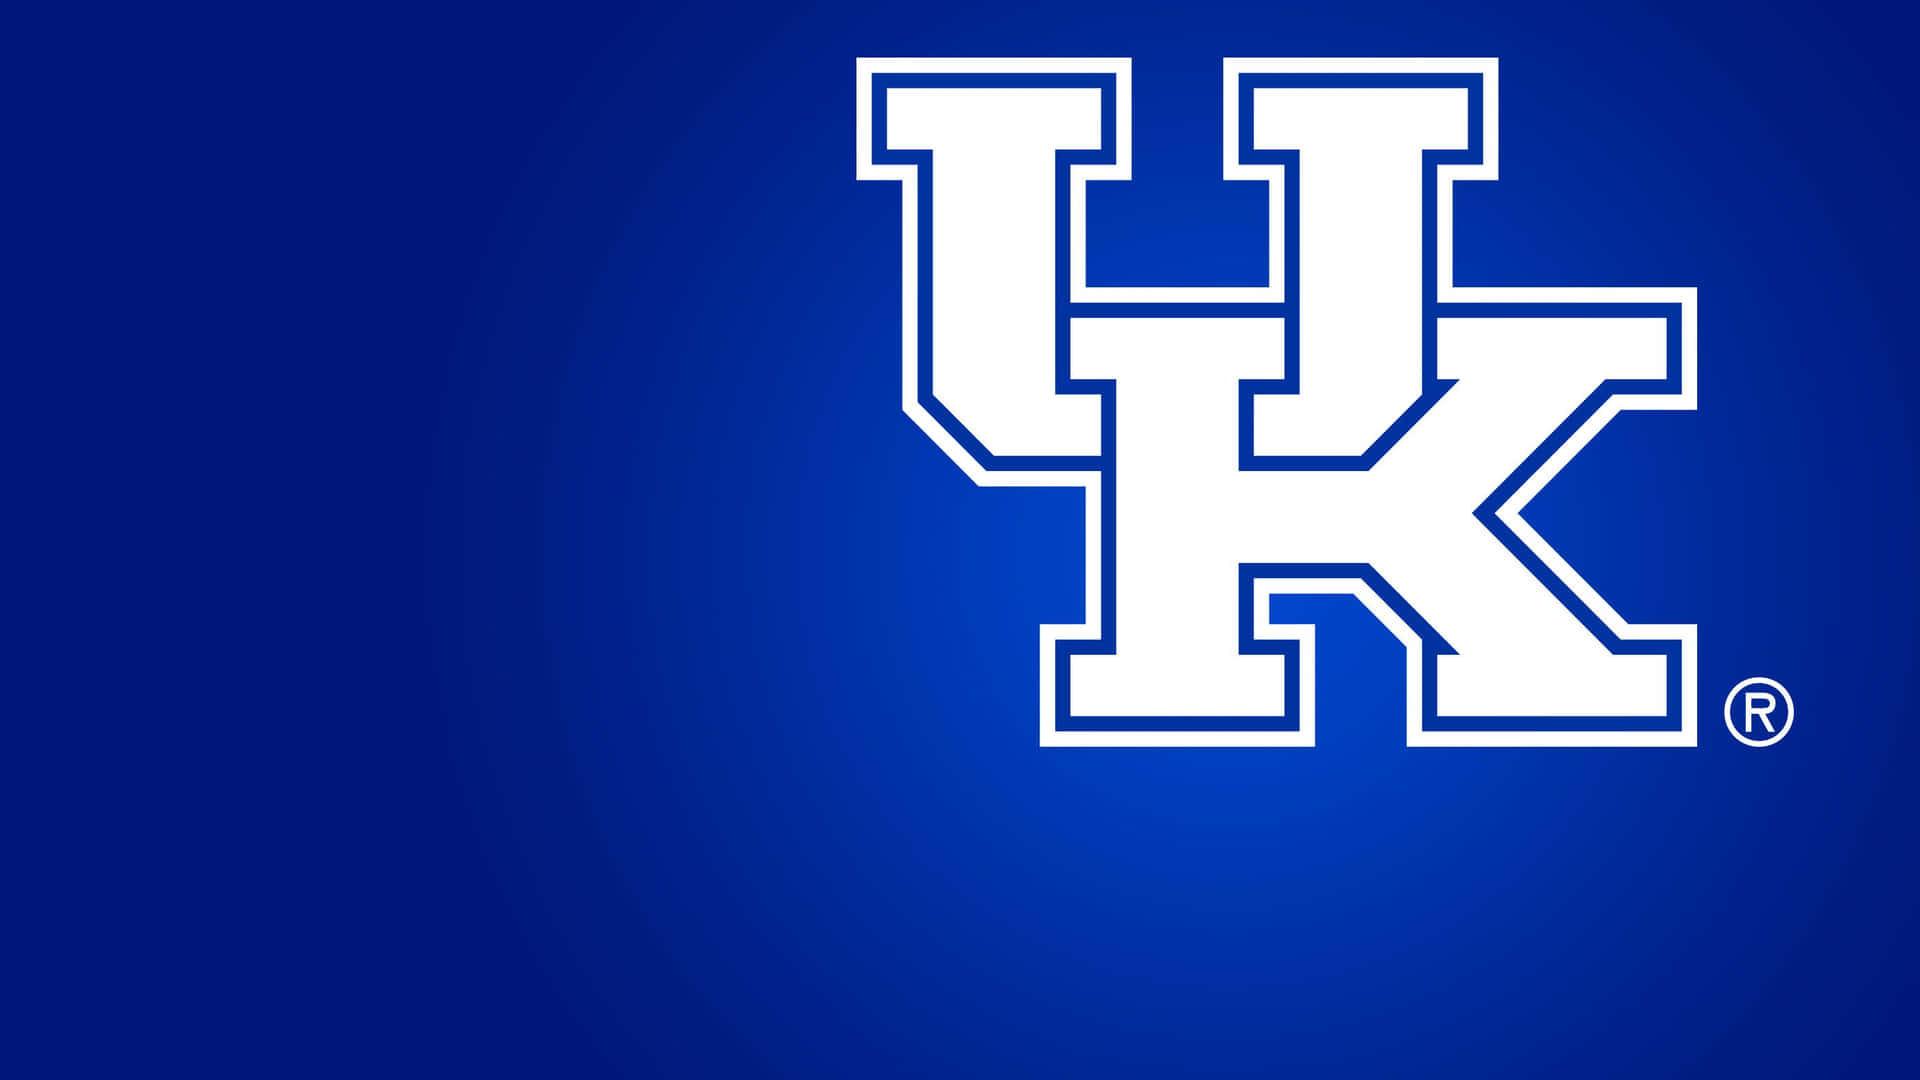 The Blue and White of the Kentucky Wildcats Wallpaper